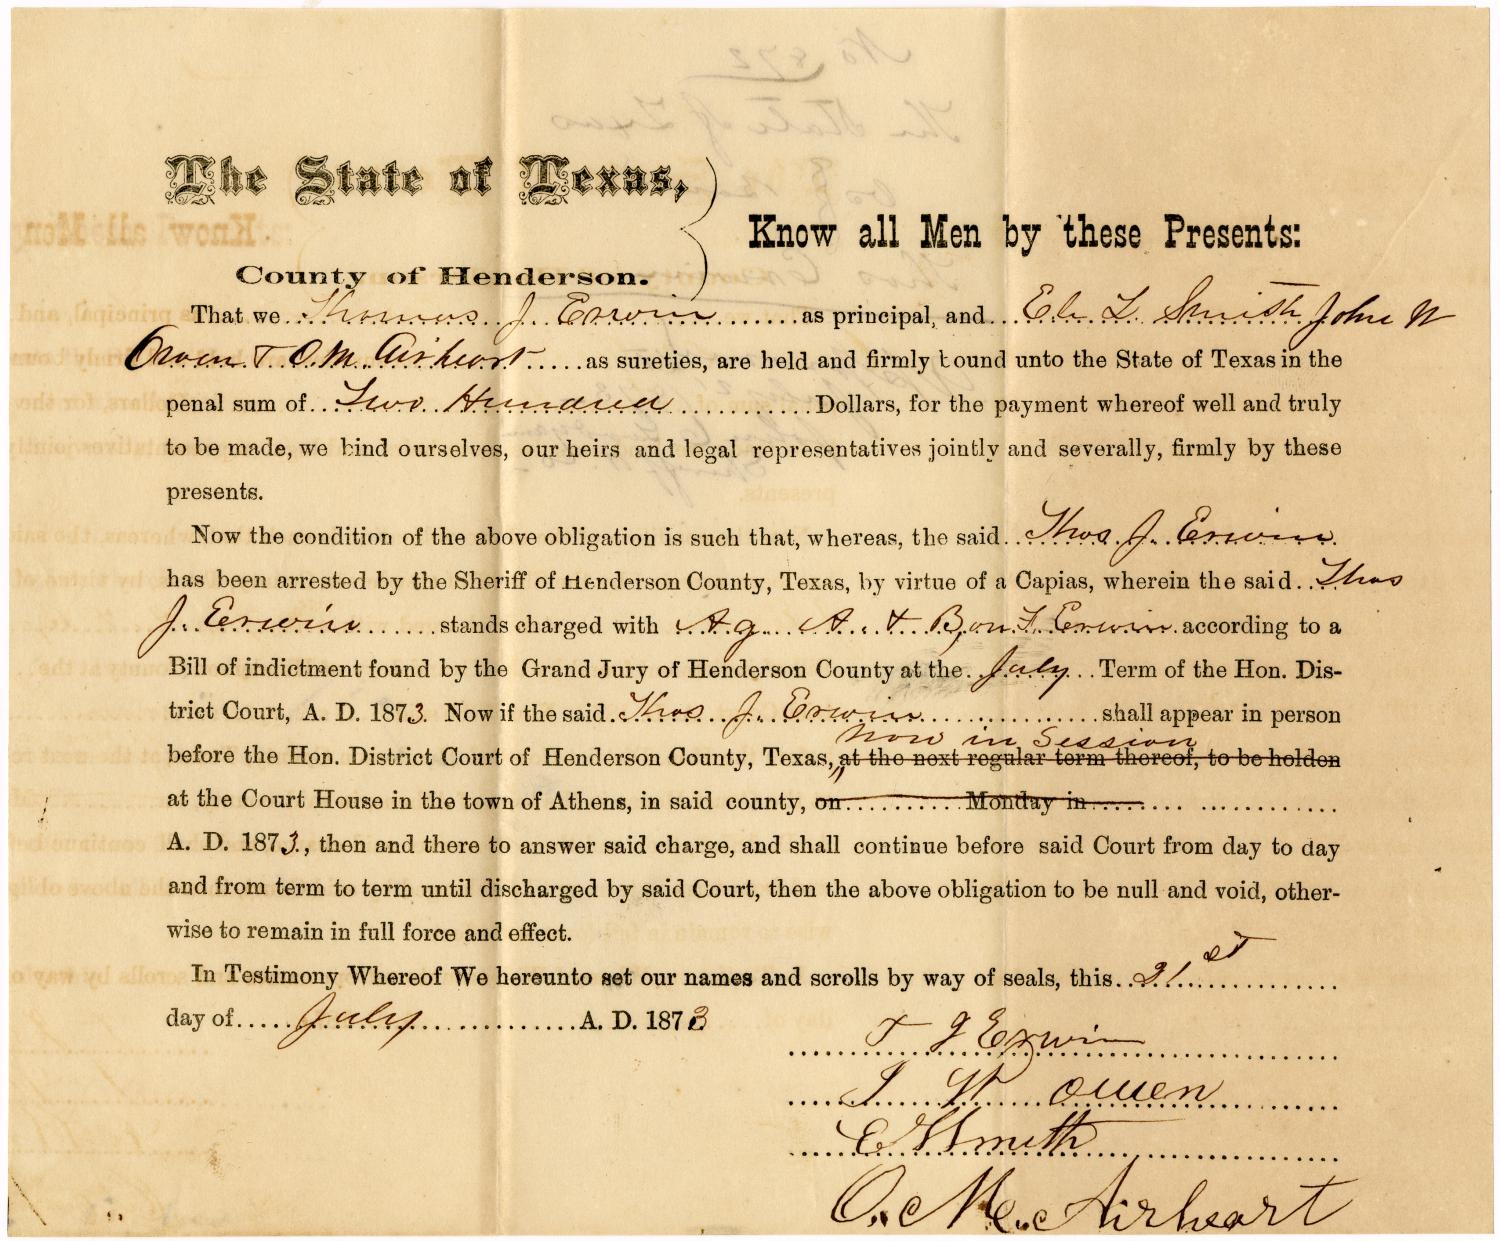 Documents related to the case of The State of Texas vs. Thomas Erwin, principal, J. W. Owen, E. L. Smith, O. M. Airheart, securities, cause no. 877, 1874
                                                
                                                    [Sequence #]: 3 of 8
                                                